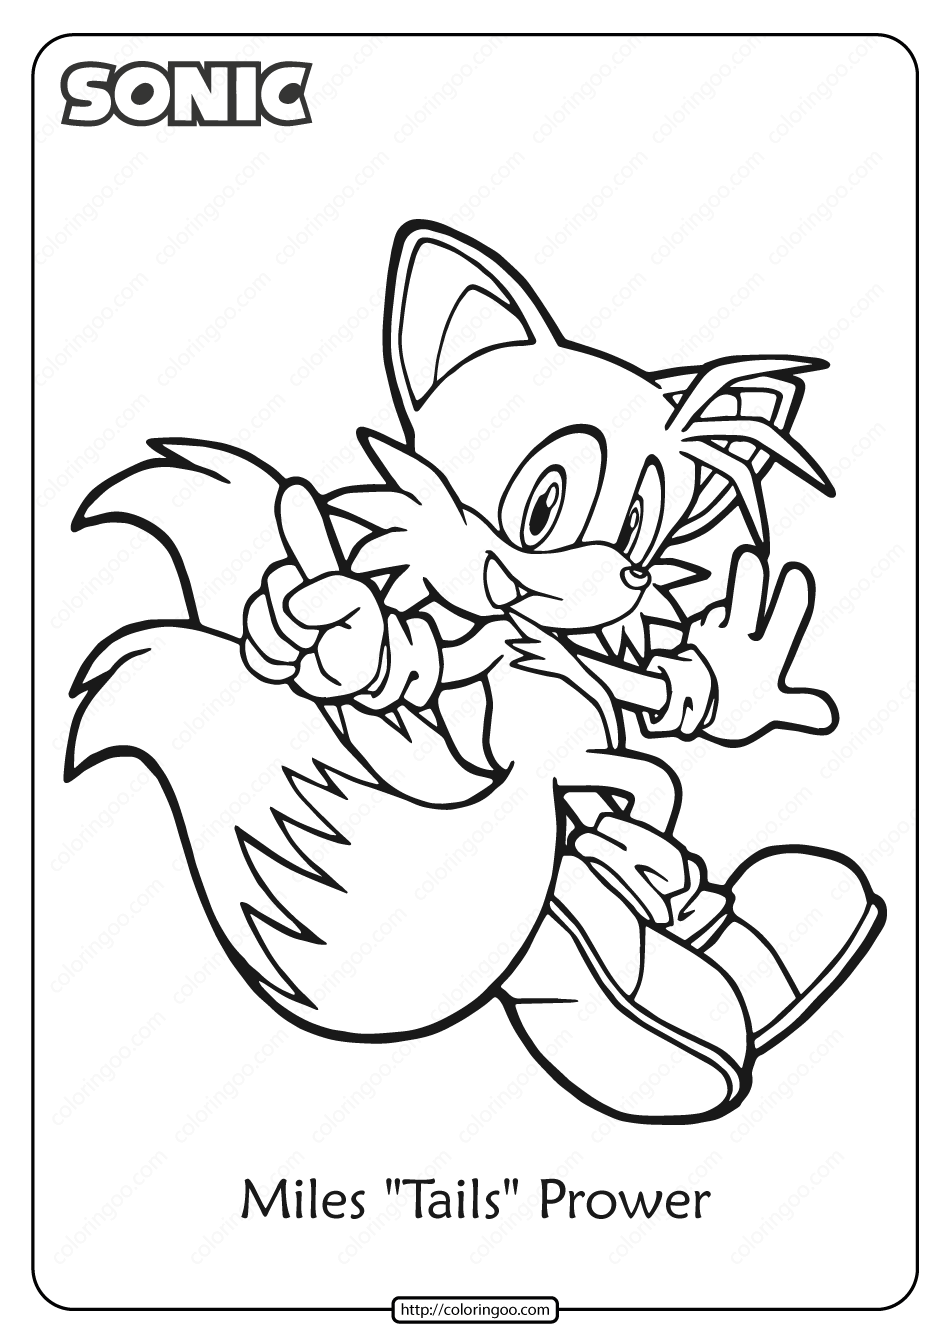 Sonic Miles Tails Prower Pdf Coloring Page